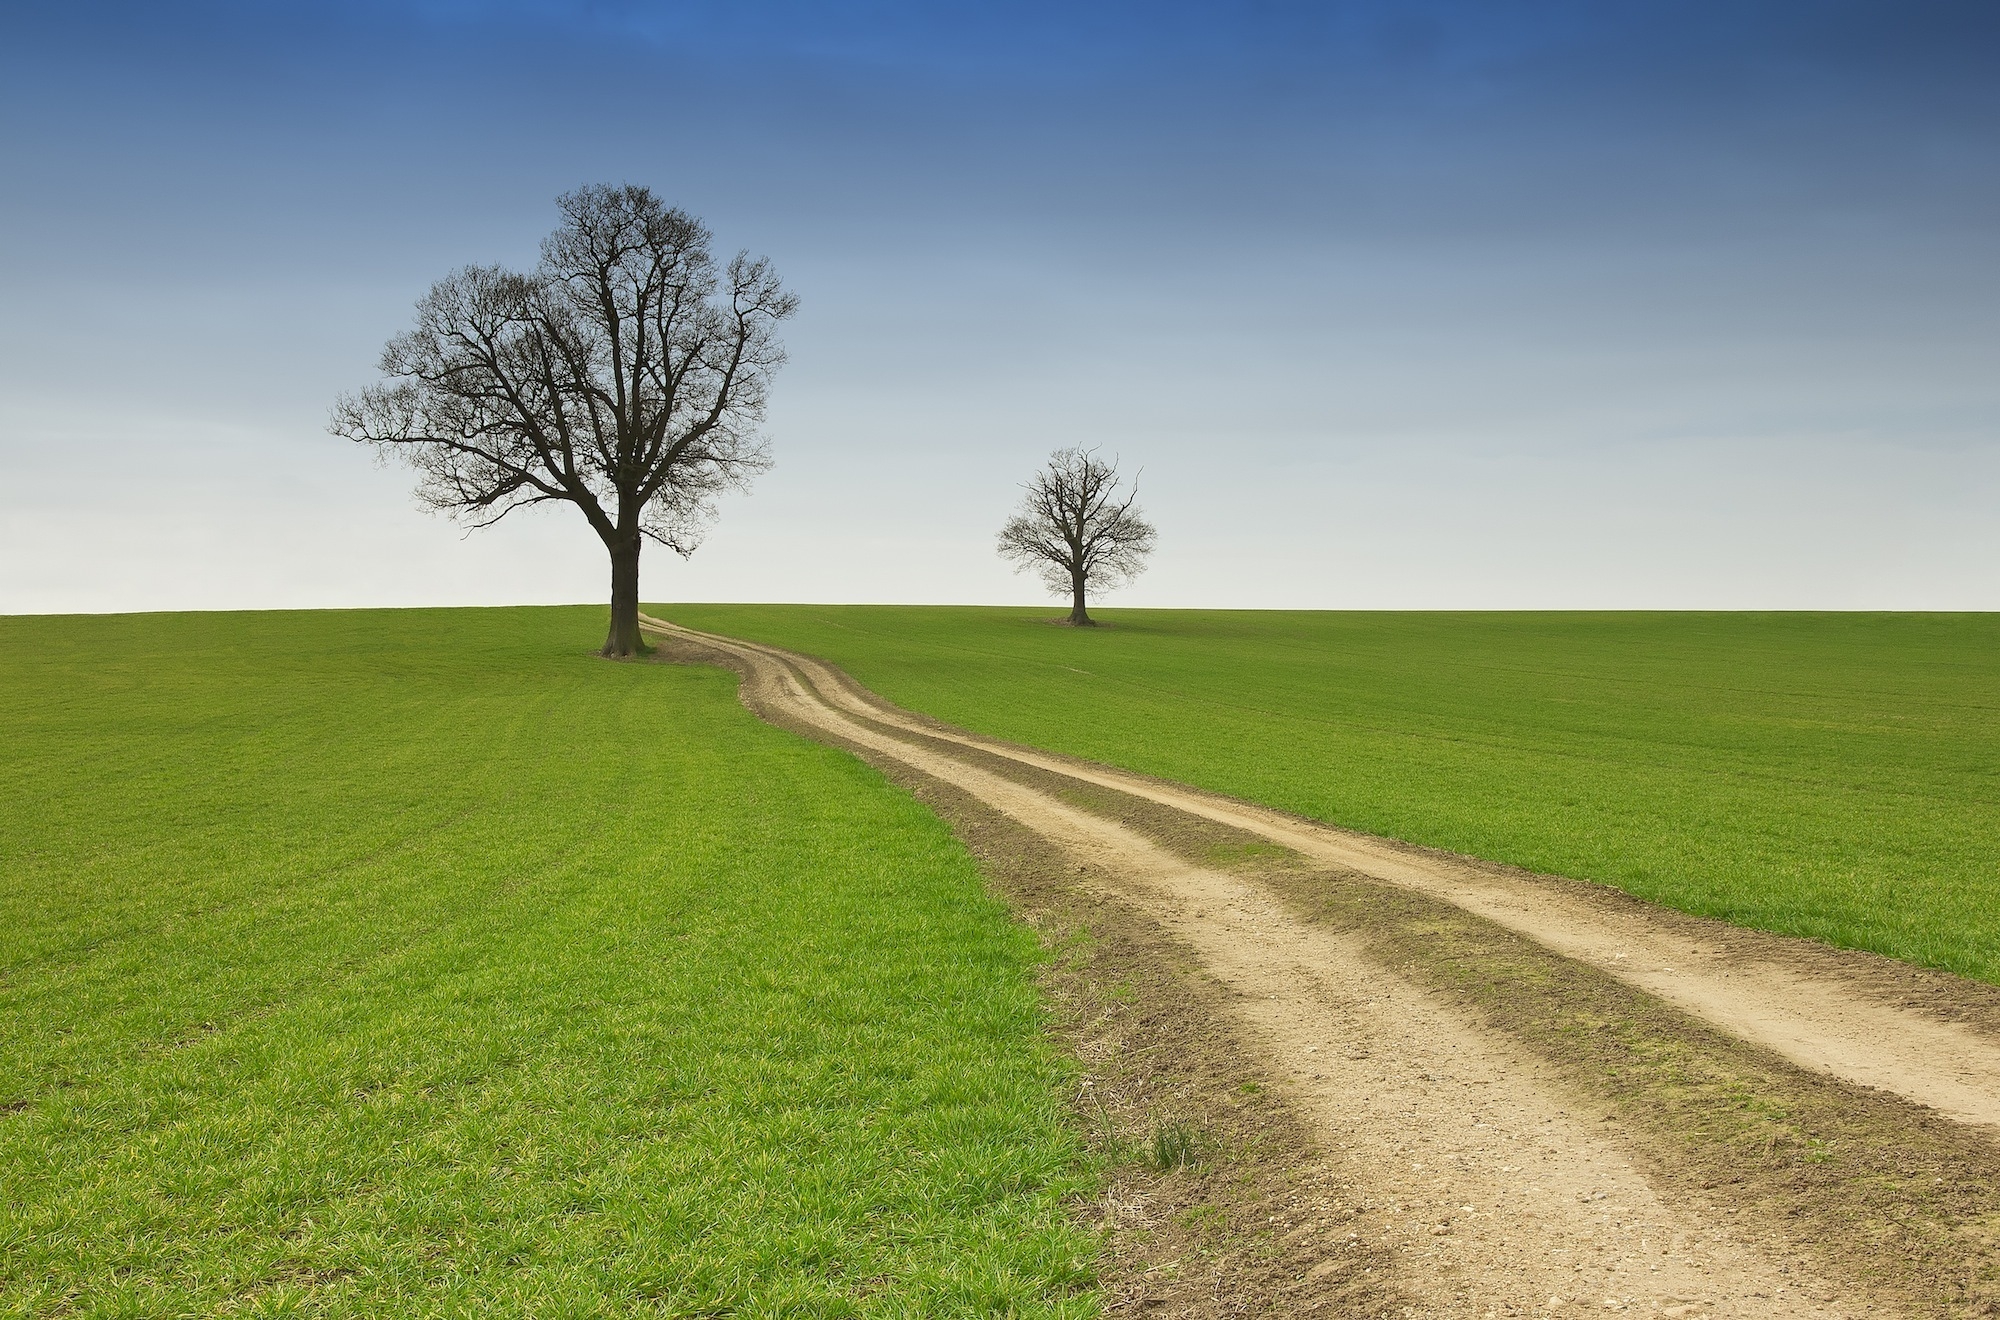 desktop Images trees, nature, road, summer, field, country, emptiness, void, countryside